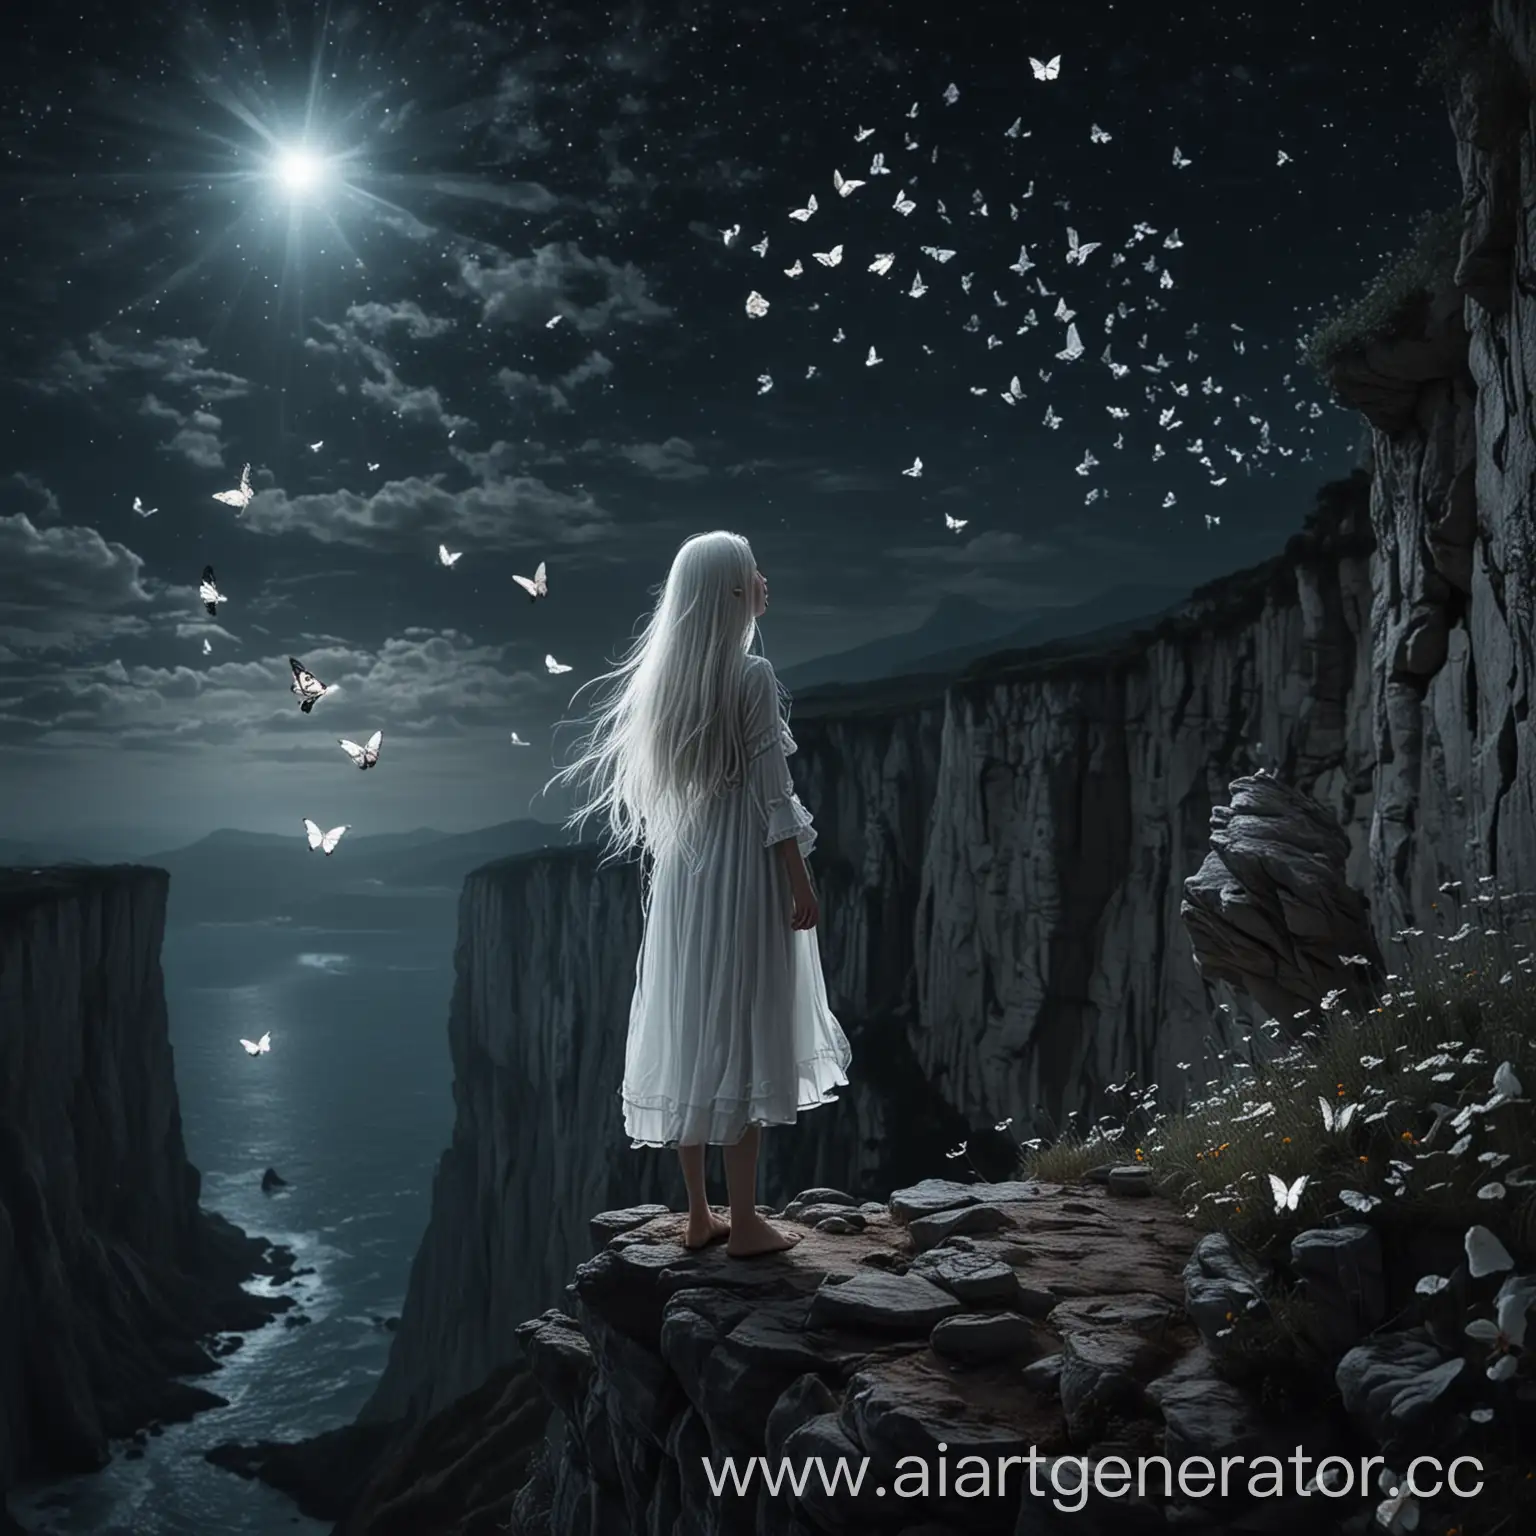 Girl-with-Long-White-Hair-on-Cliff-Edge-at-Night-with-Butterflies